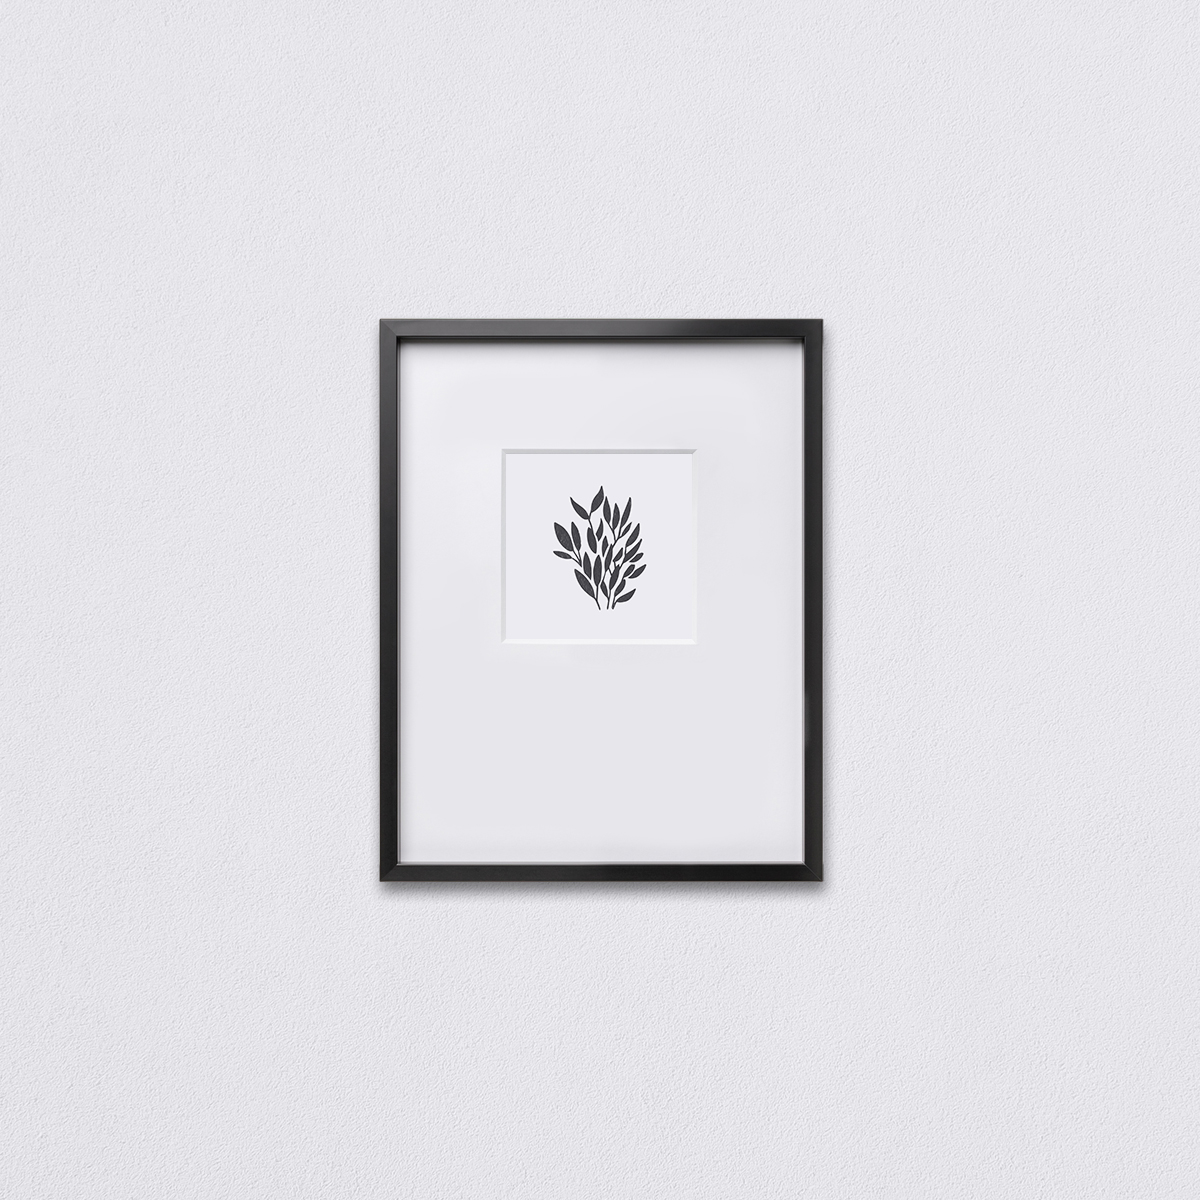 11 x 14 inch Artifact Uprising Modern Metal Frame in Black featuring black and white drawing of simple foliage matted to 5 inch square